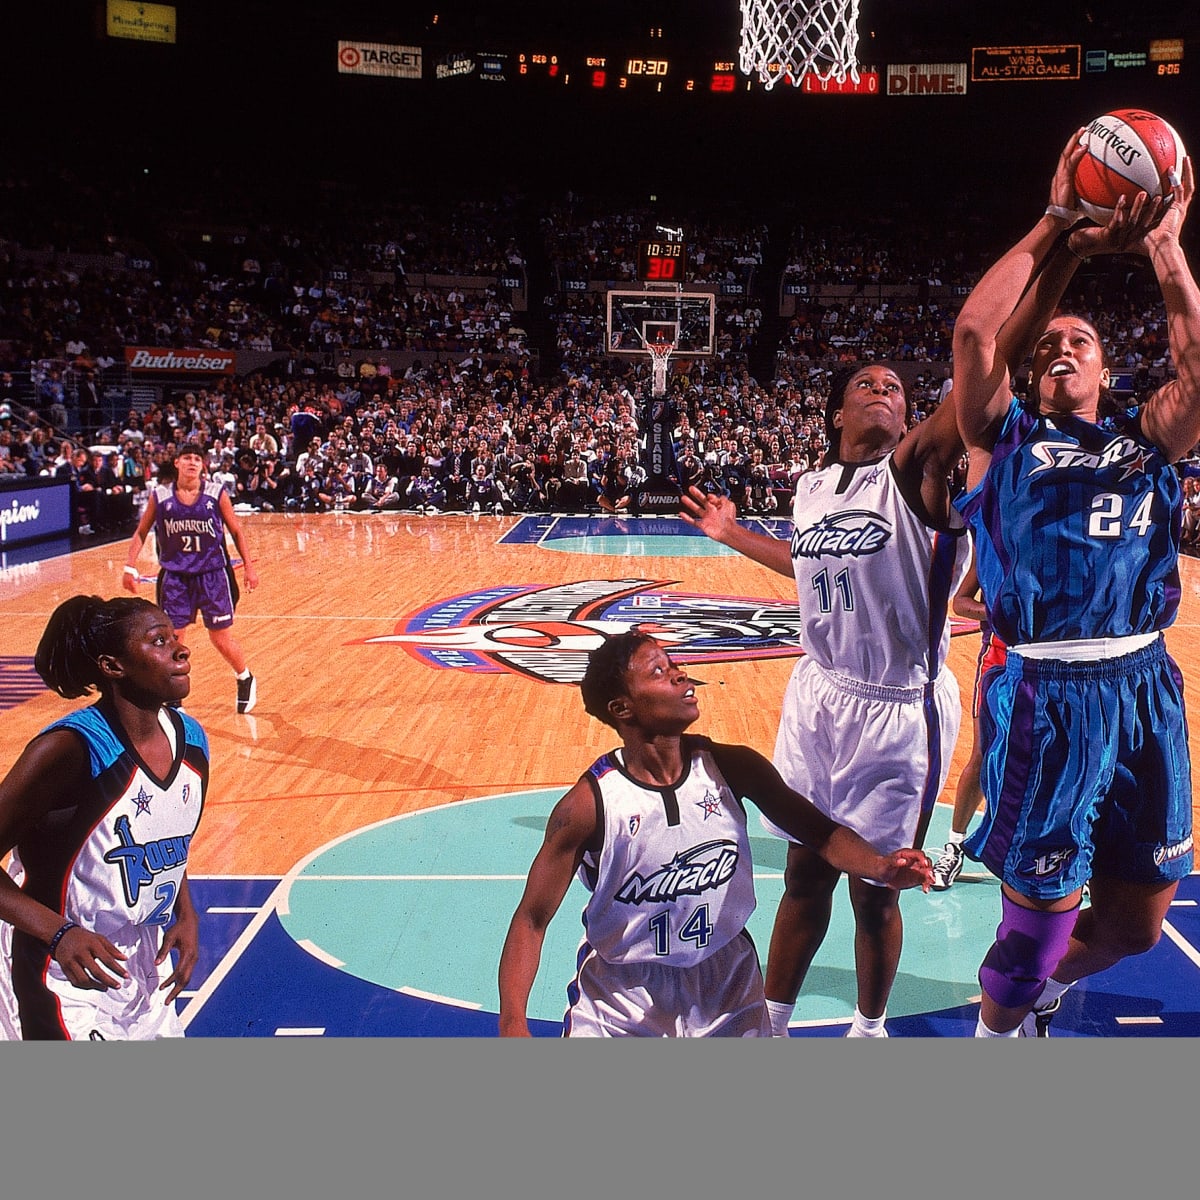 In the WNBA's Early Days, Houston's Comets Came Around Every Year